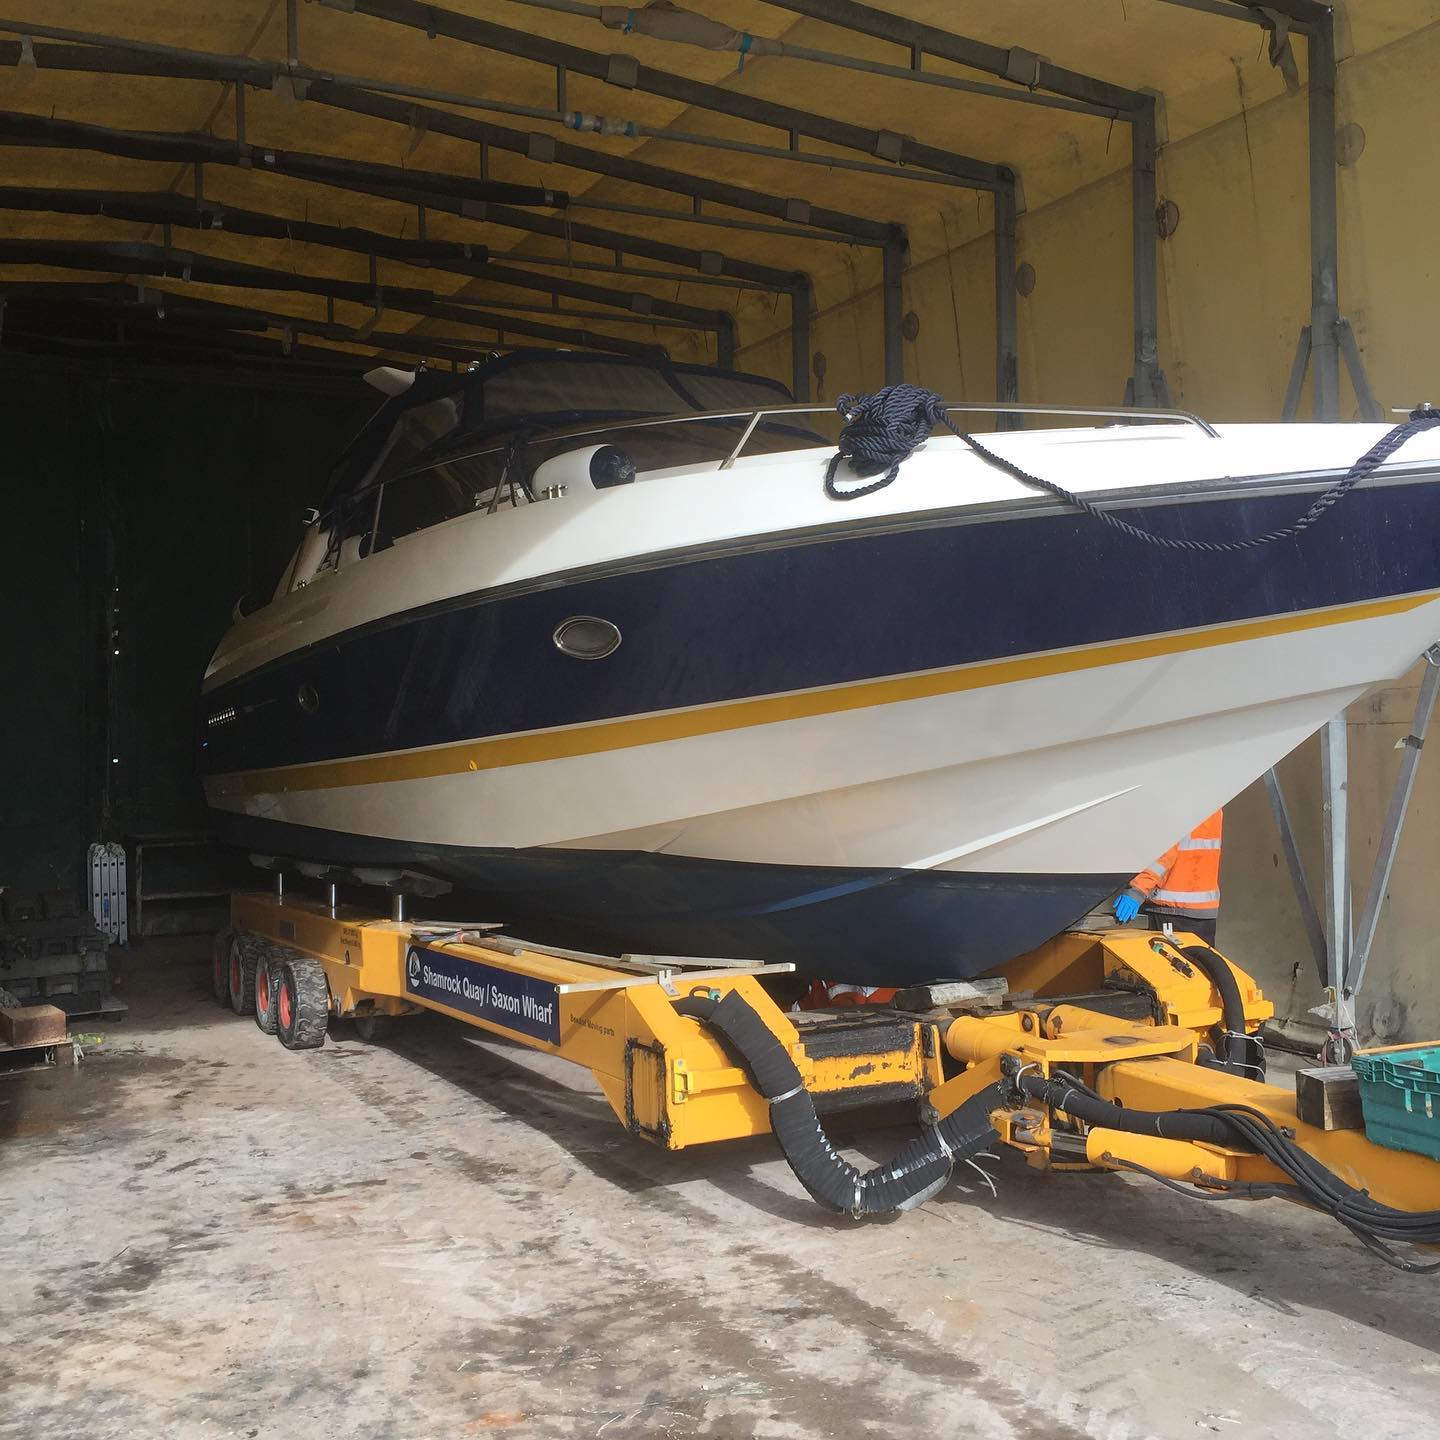 Sunseeker_Comanche_40_moving_into_work_tent_and_were_getting_ready_for_a_Refit_on_full_refurbishment_of_Windscreen_and_ajpg